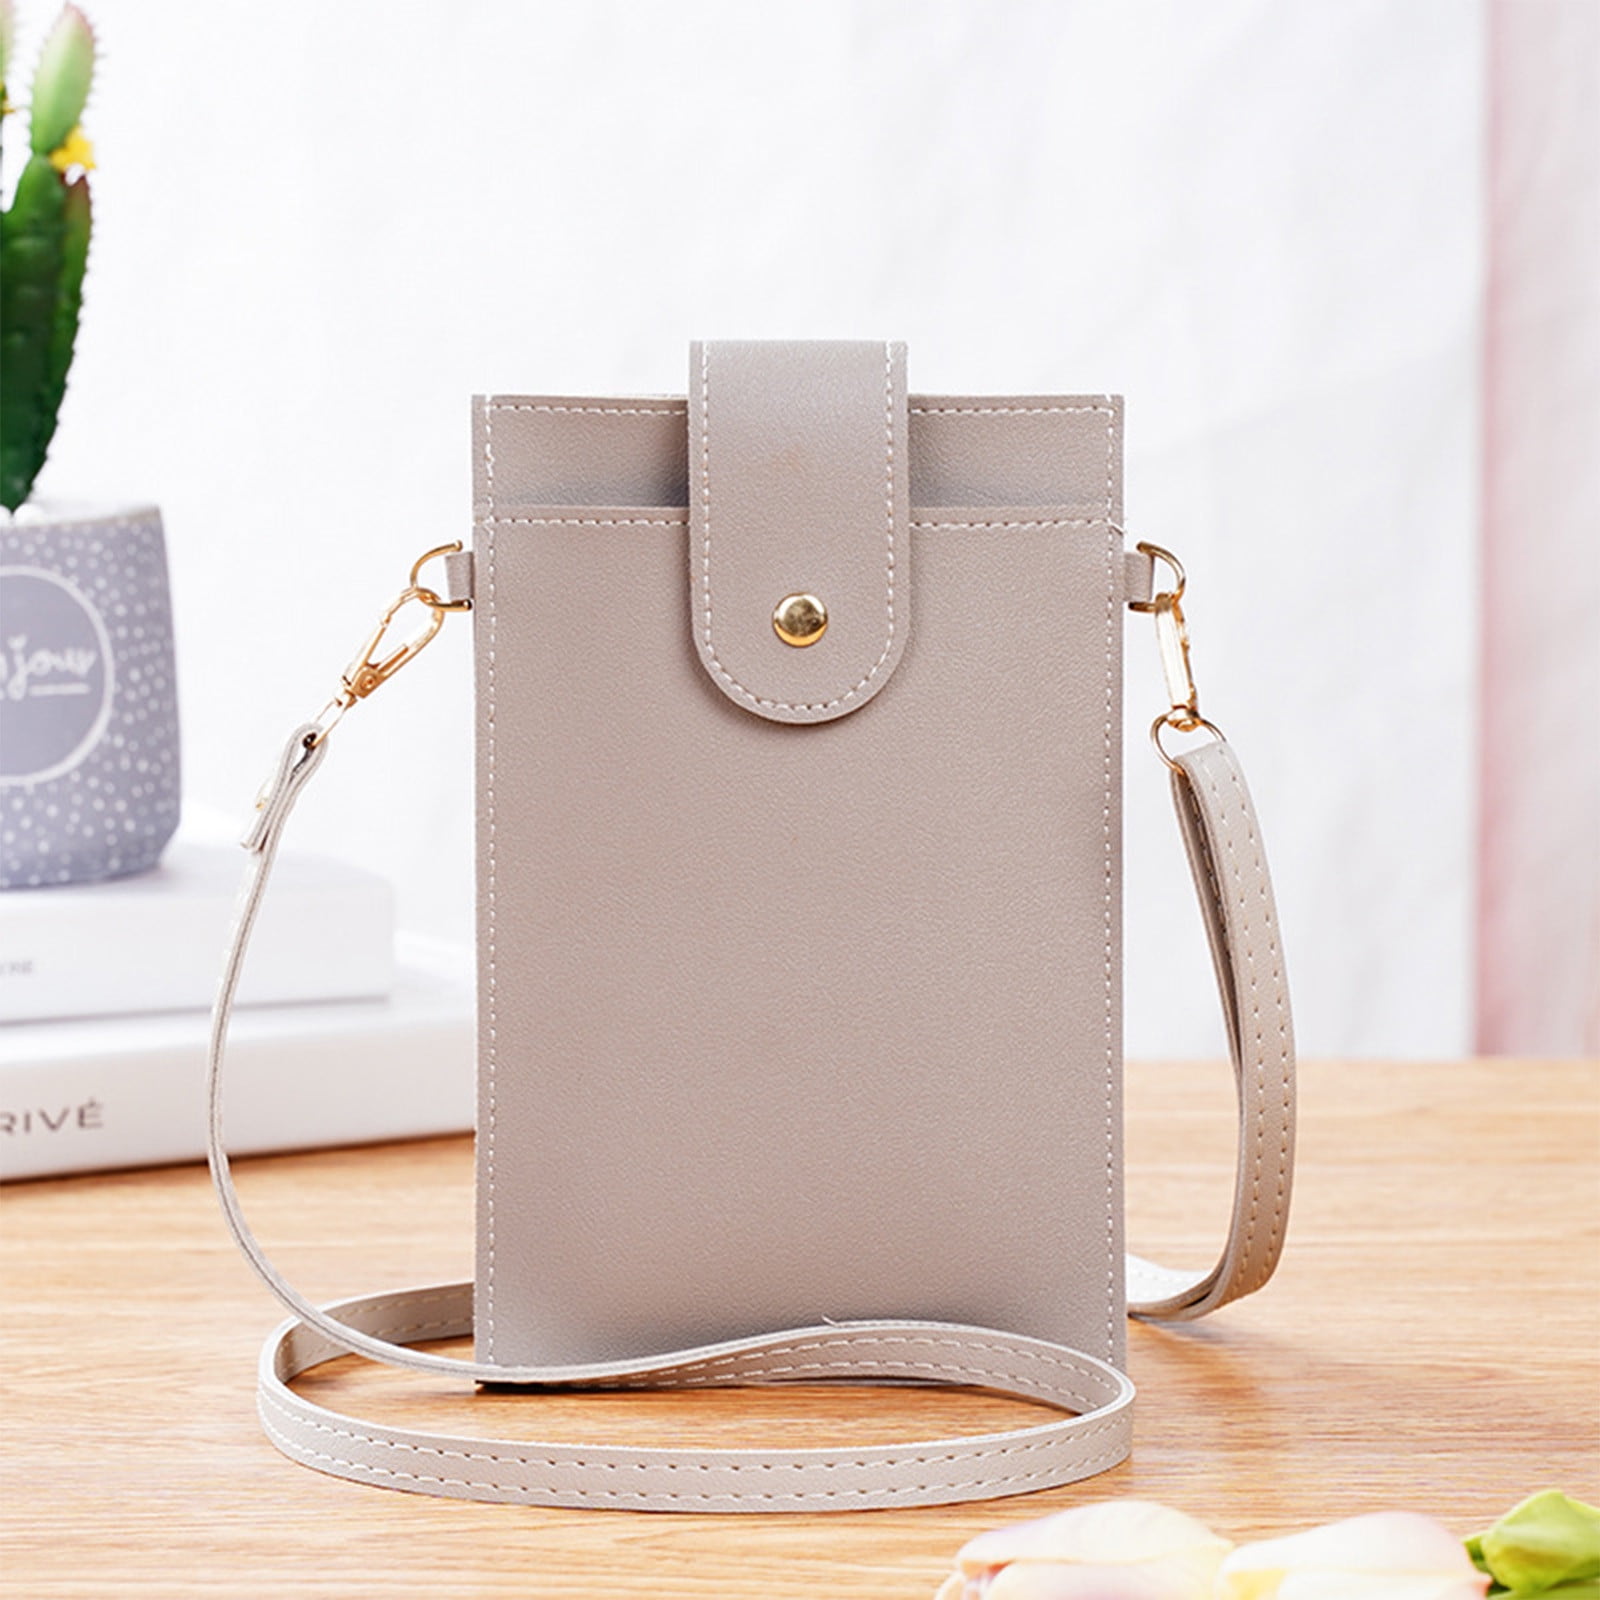 Touchscreen Phone Purse Crossbody For Women Cellphone With Shoulder Strap Waterproof Wallet Case Clear Window Up To 6 7in 65 a8de7288 9b51 4aaf a2ed 325d48af44c9.d653ff9627208ae16a0a663d4050f338